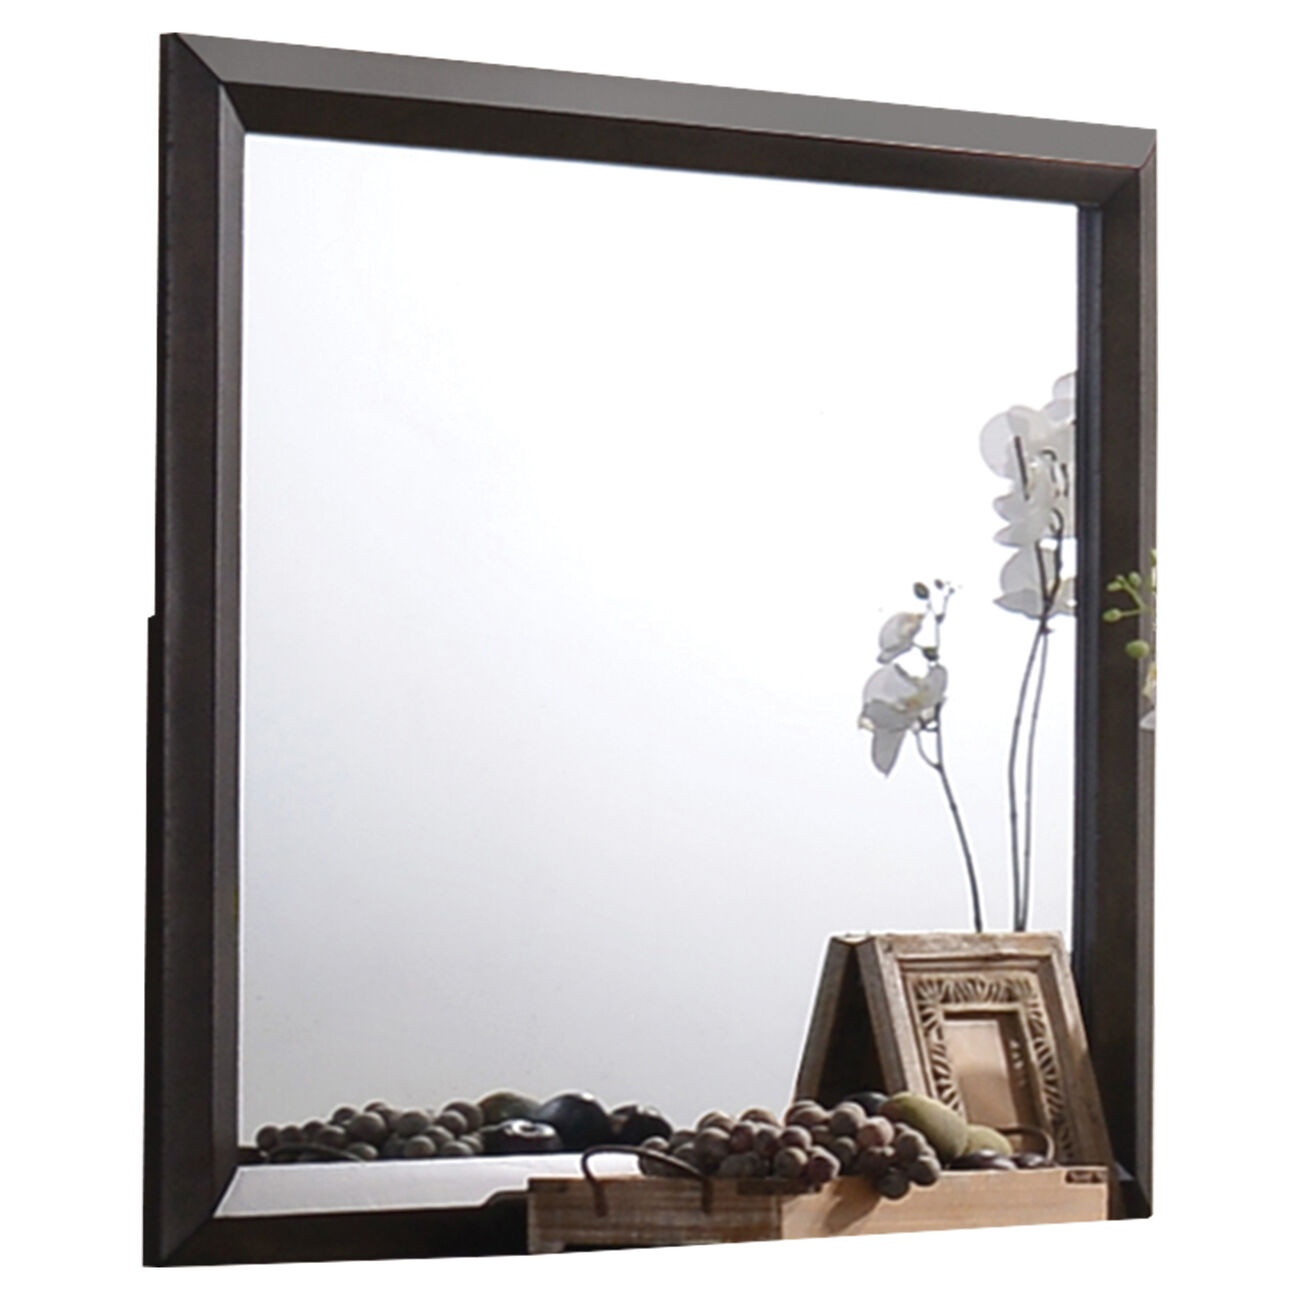 Transition Style Wooden Mirror with Rectangular Shape,Brown and Silver